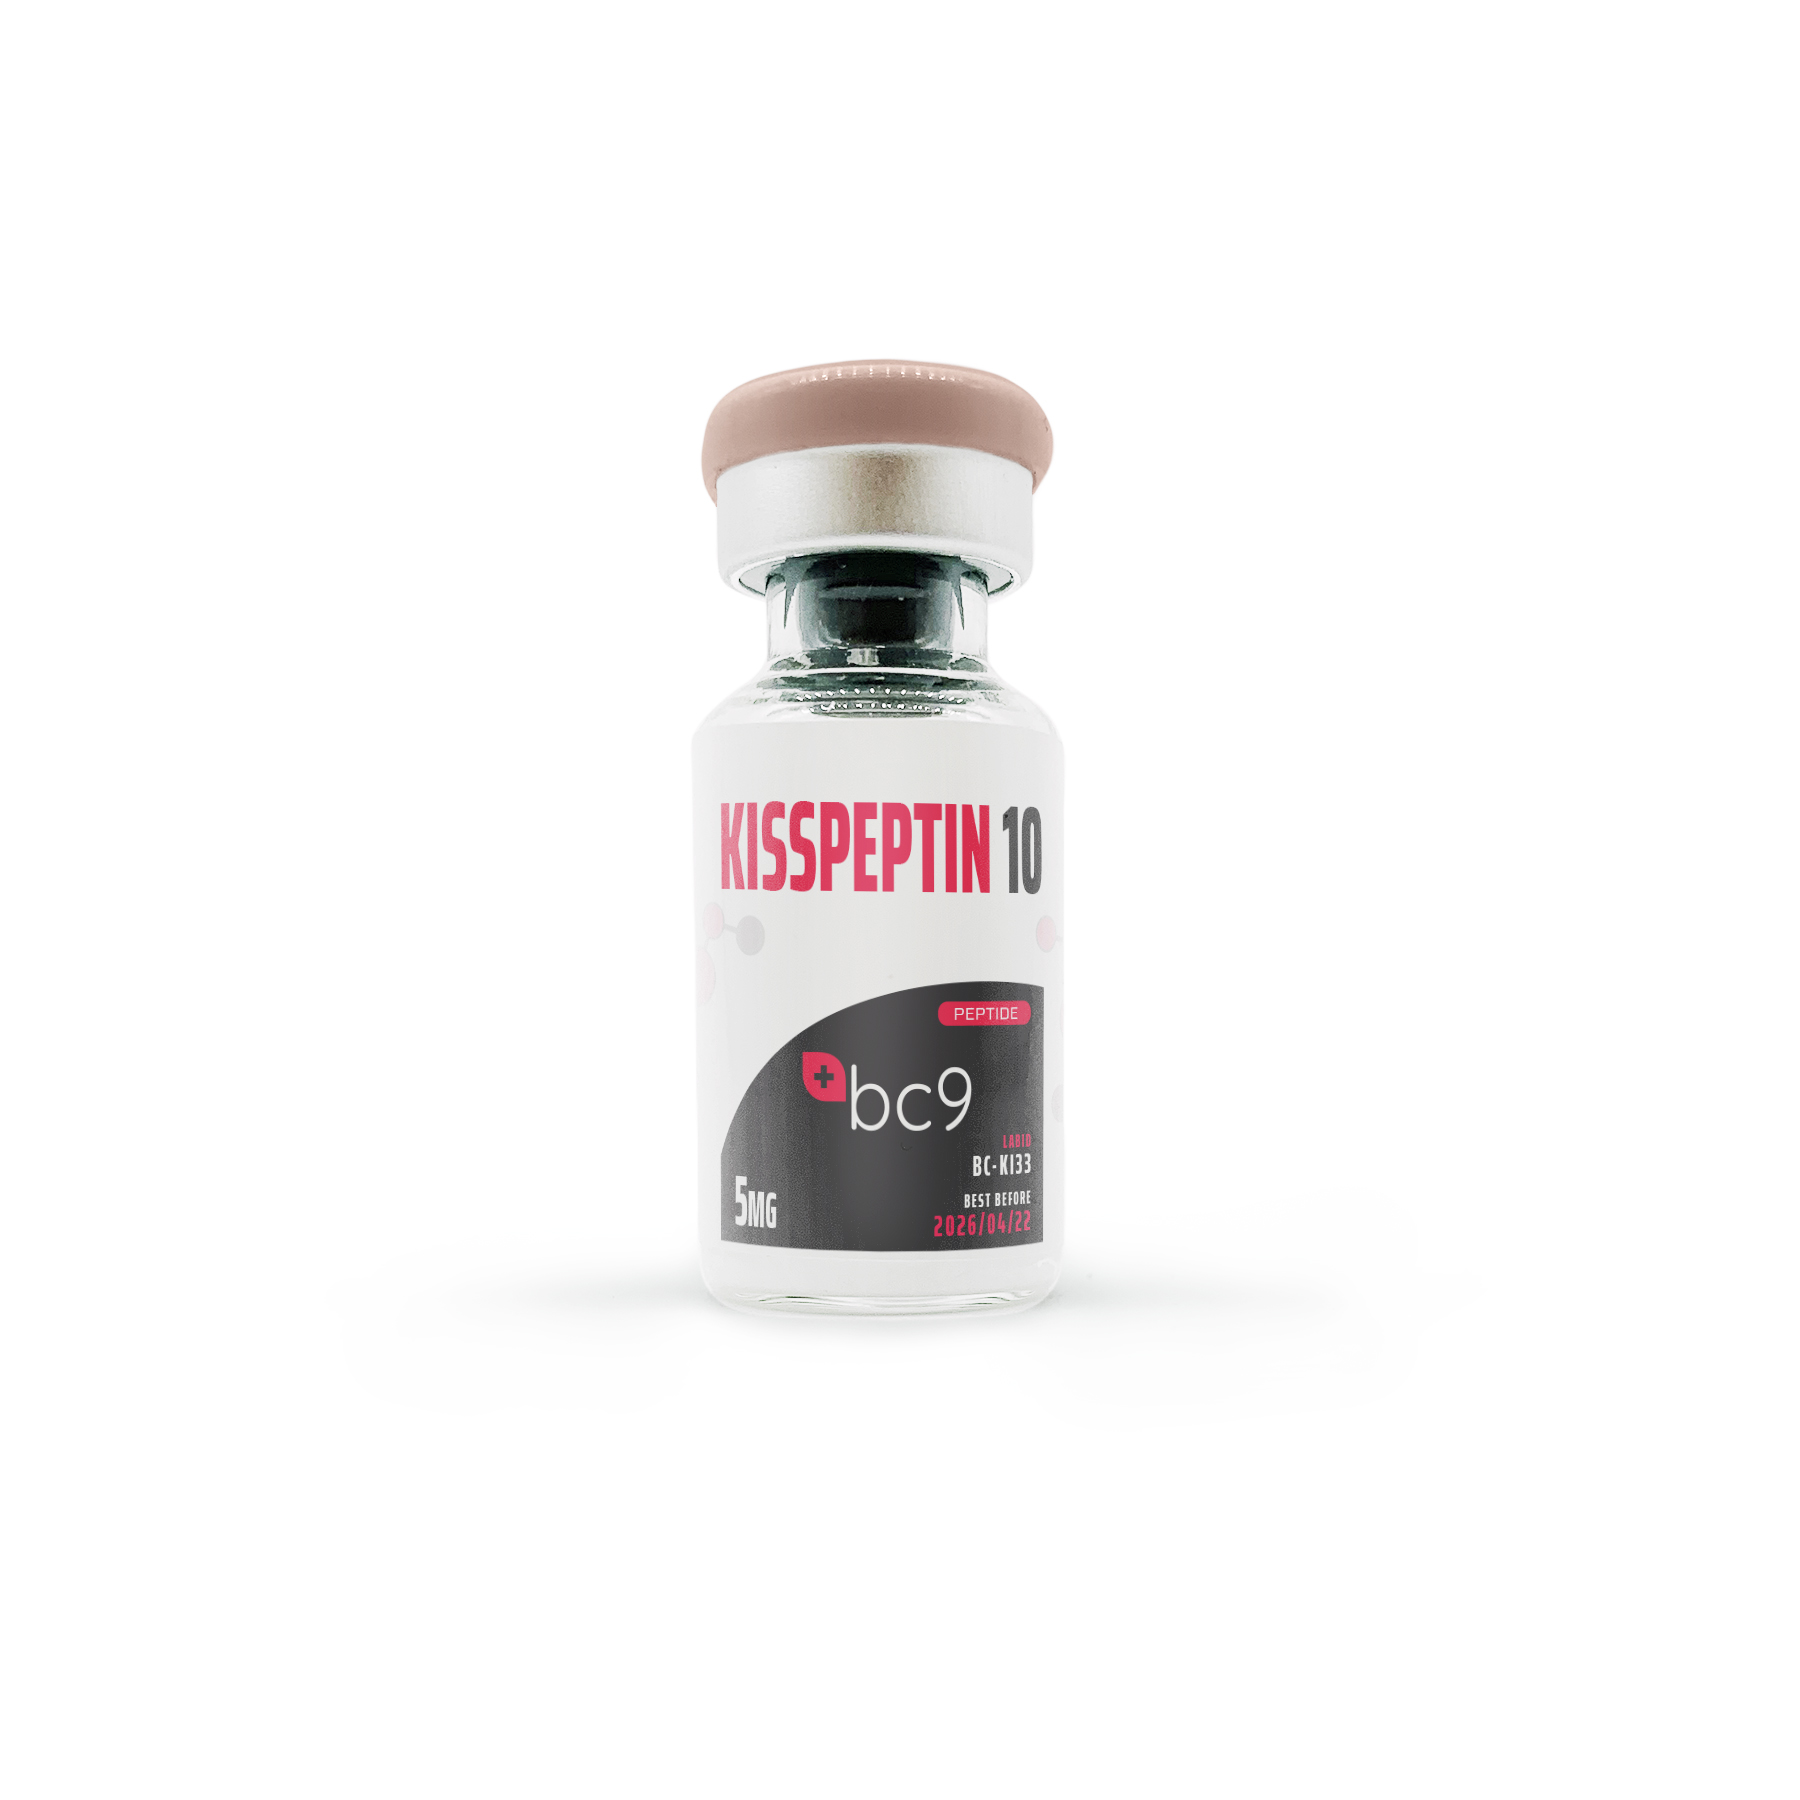 Kisspeptin 10 Peptide for Sale | Fast Shipping | BC9.org